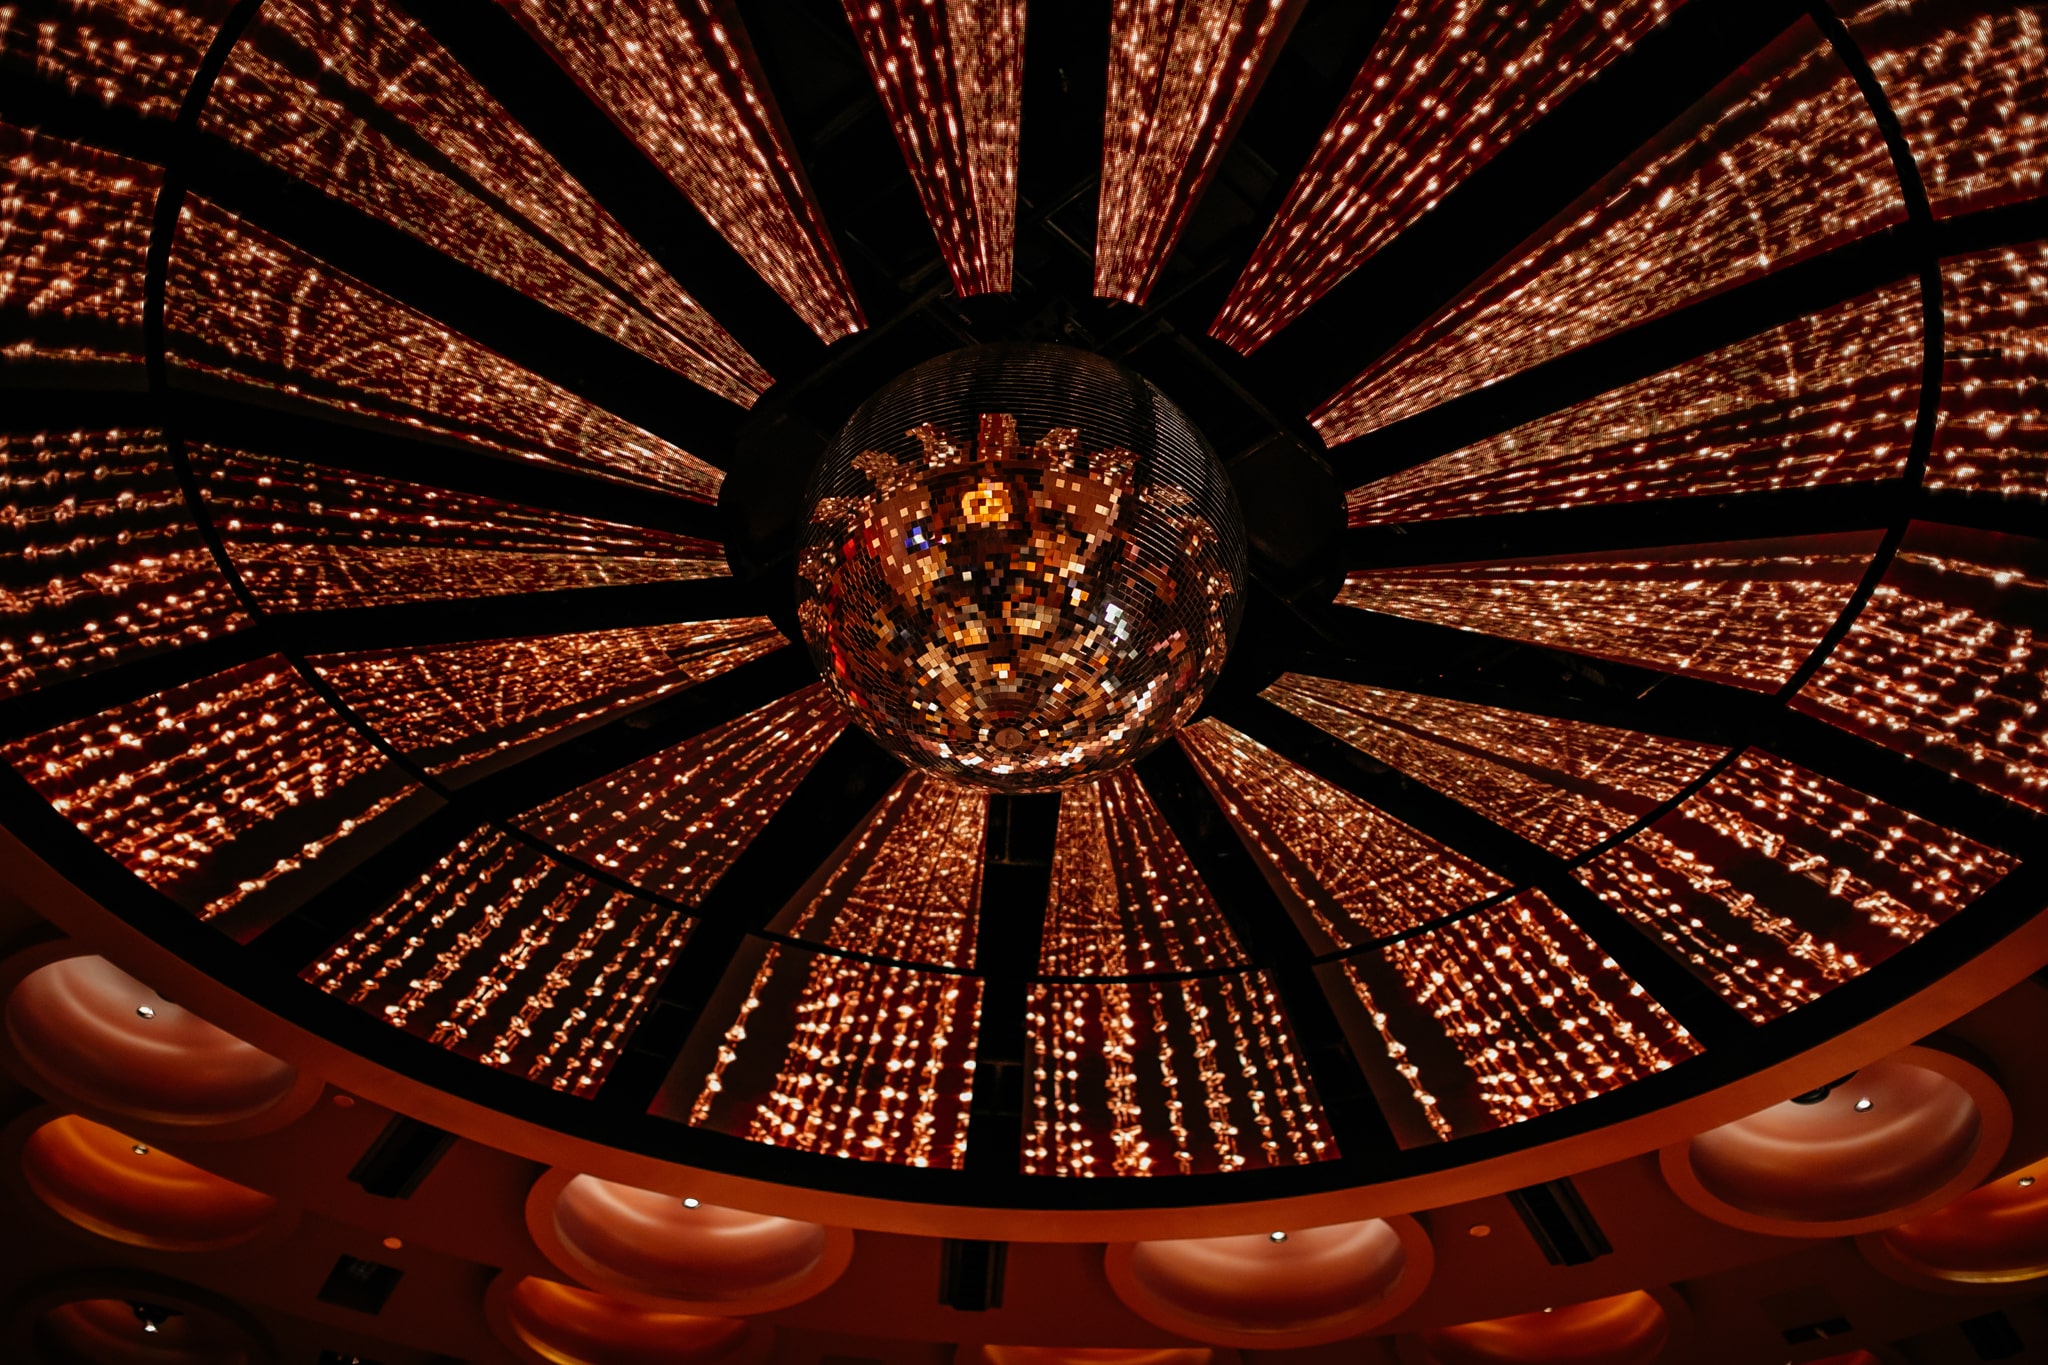 Disco decor in the main dining room at Queen Miami Beach